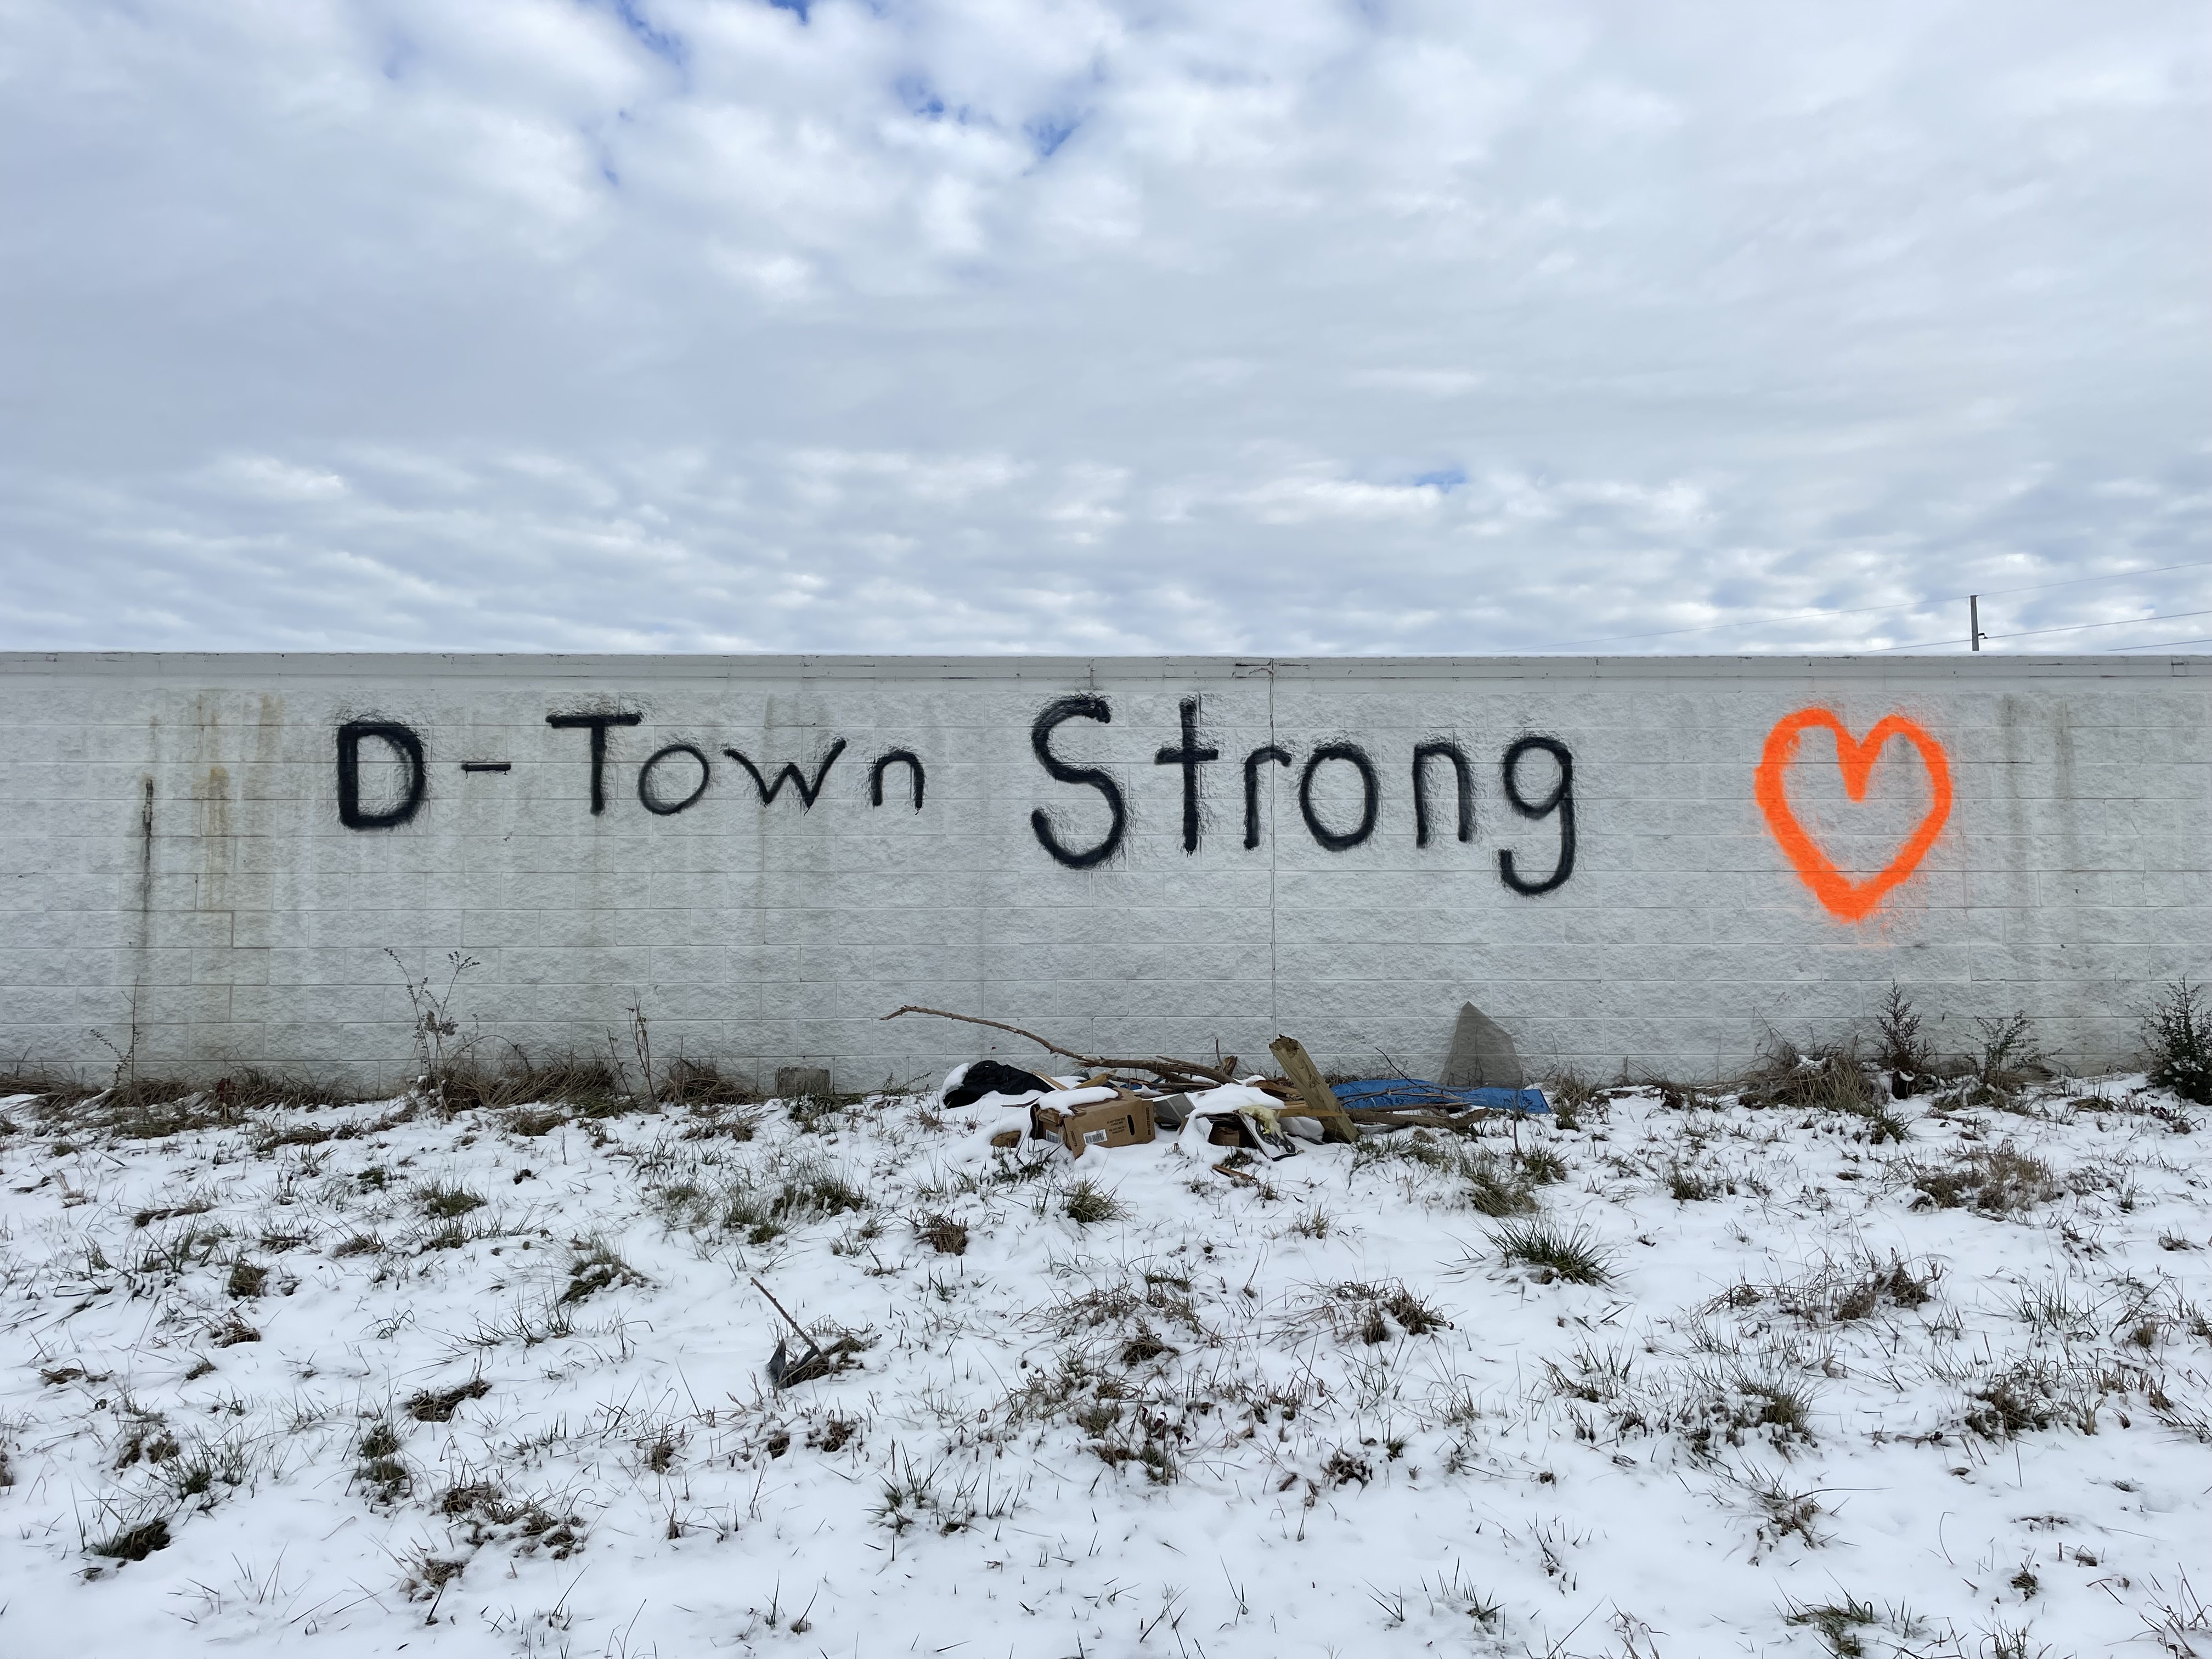 A message of resilience in Dawson Springs. (Photo credit: Ryan Morabito)